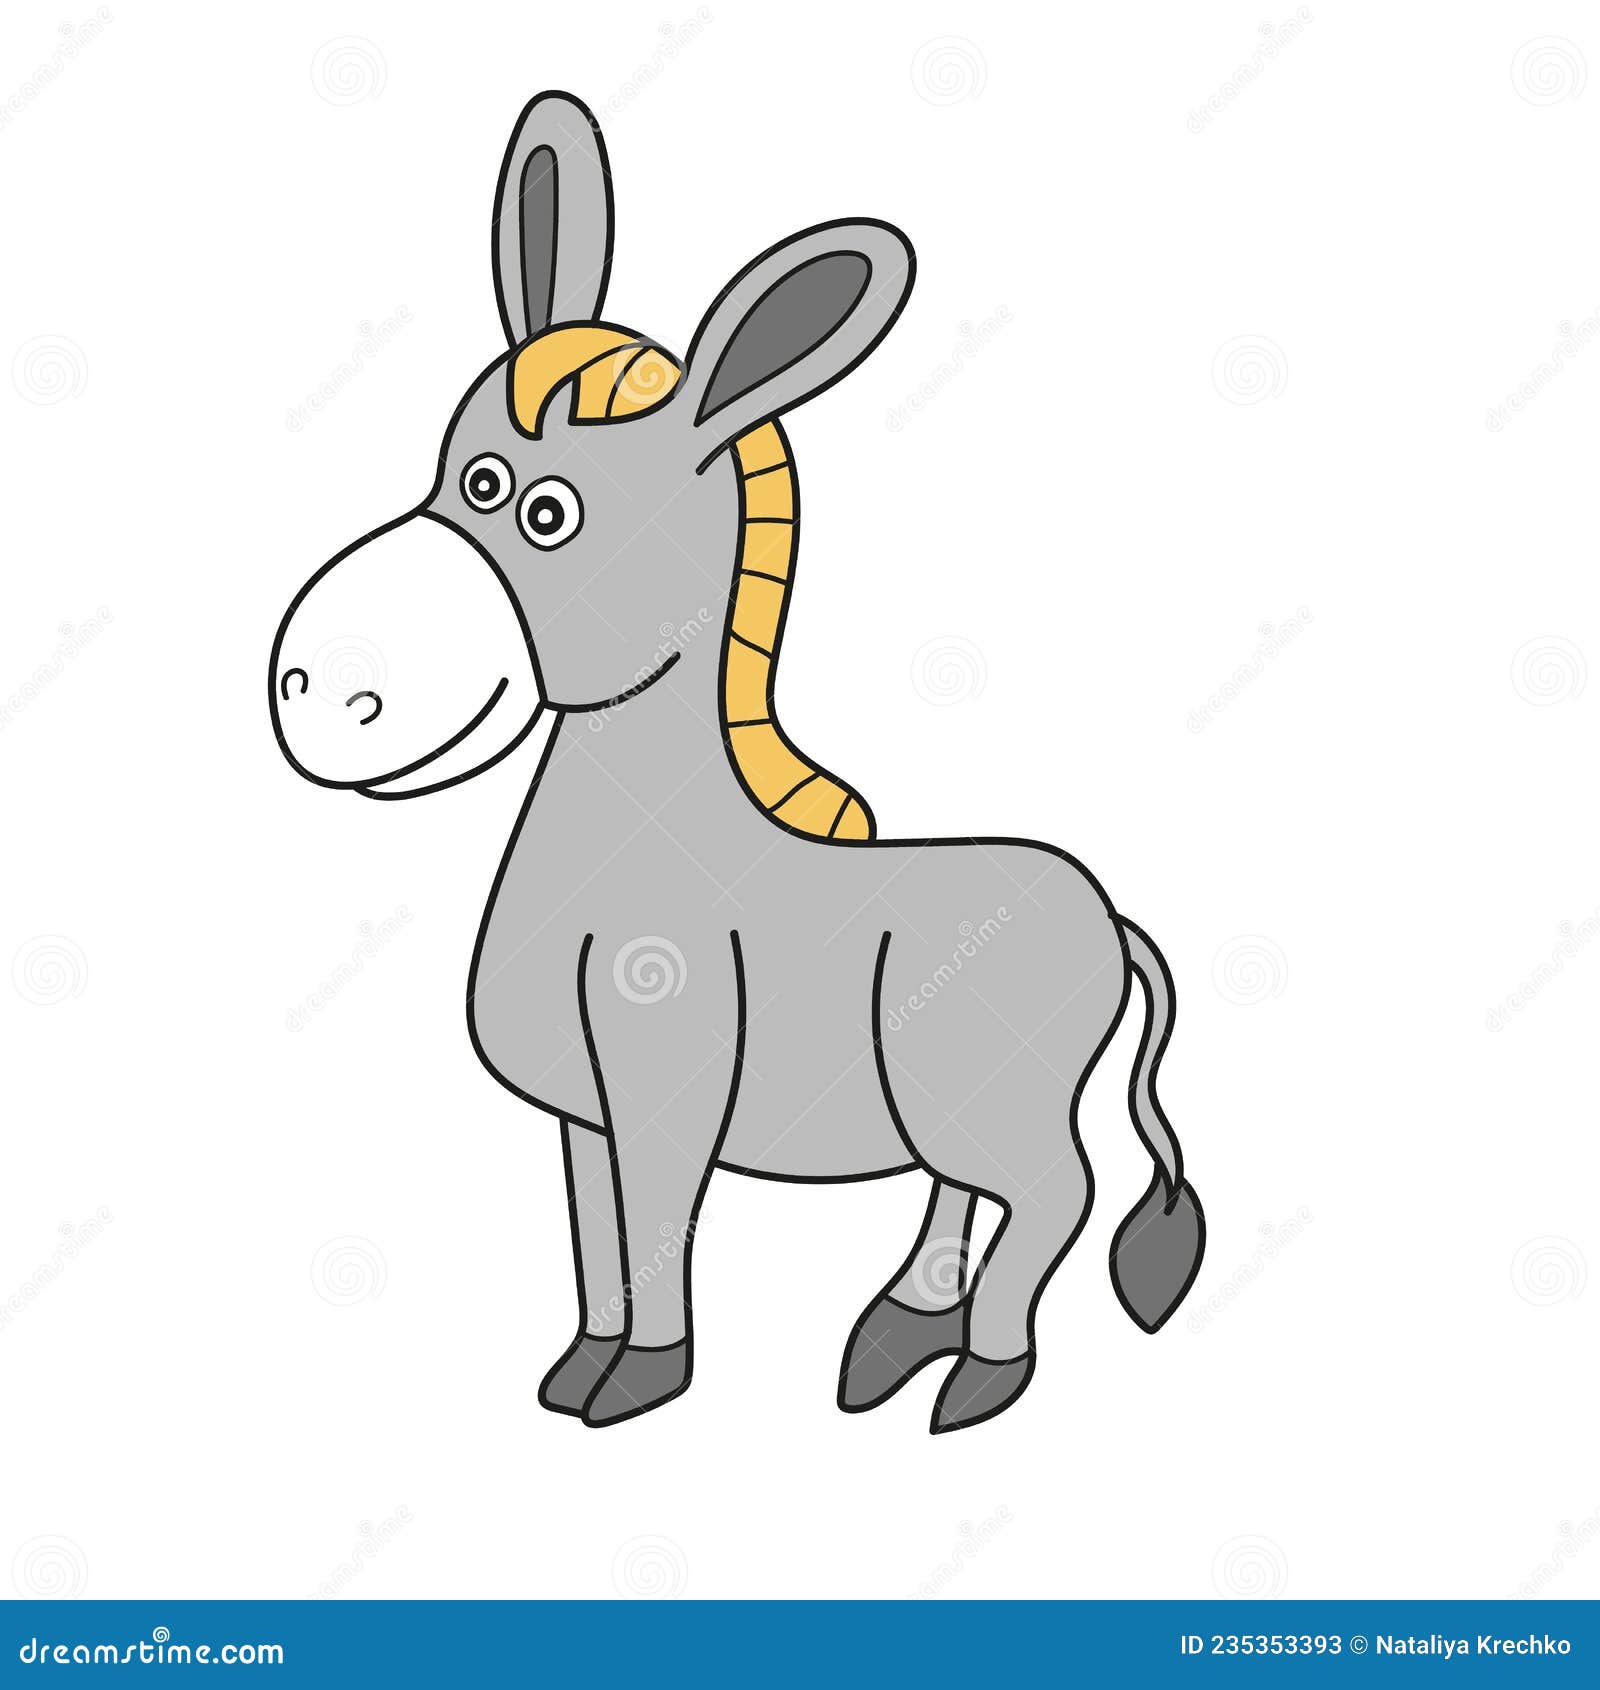 Simple Cartoon Icon. Cartoon Donkey - Cute Character for Children Stock ...